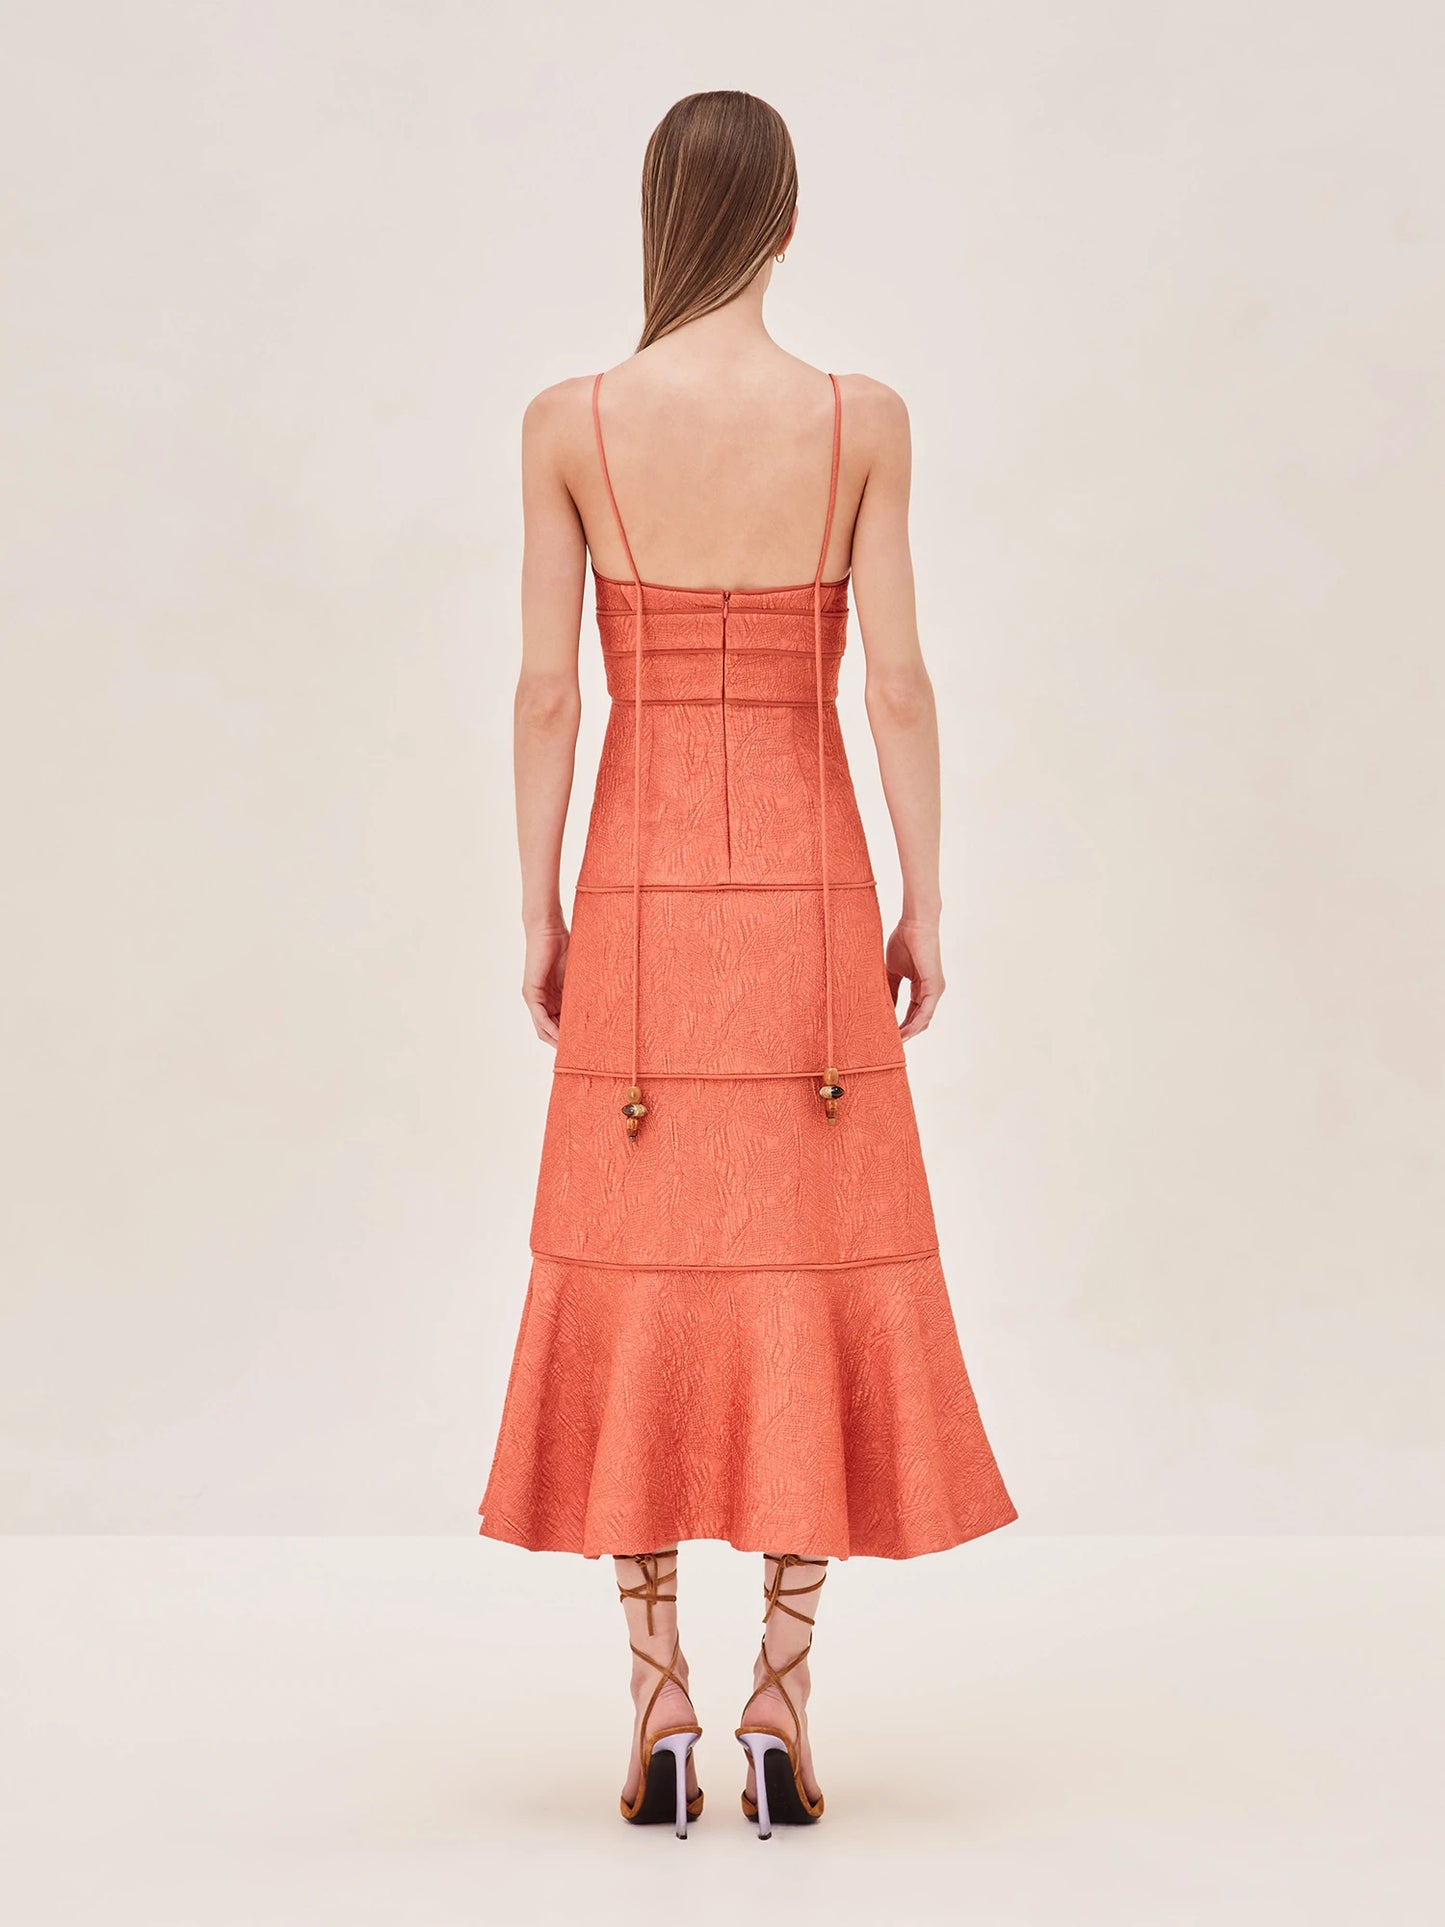 ALEXIS Vereda sleevless Midi dress with long staps and a bead detail on strap in terracotta